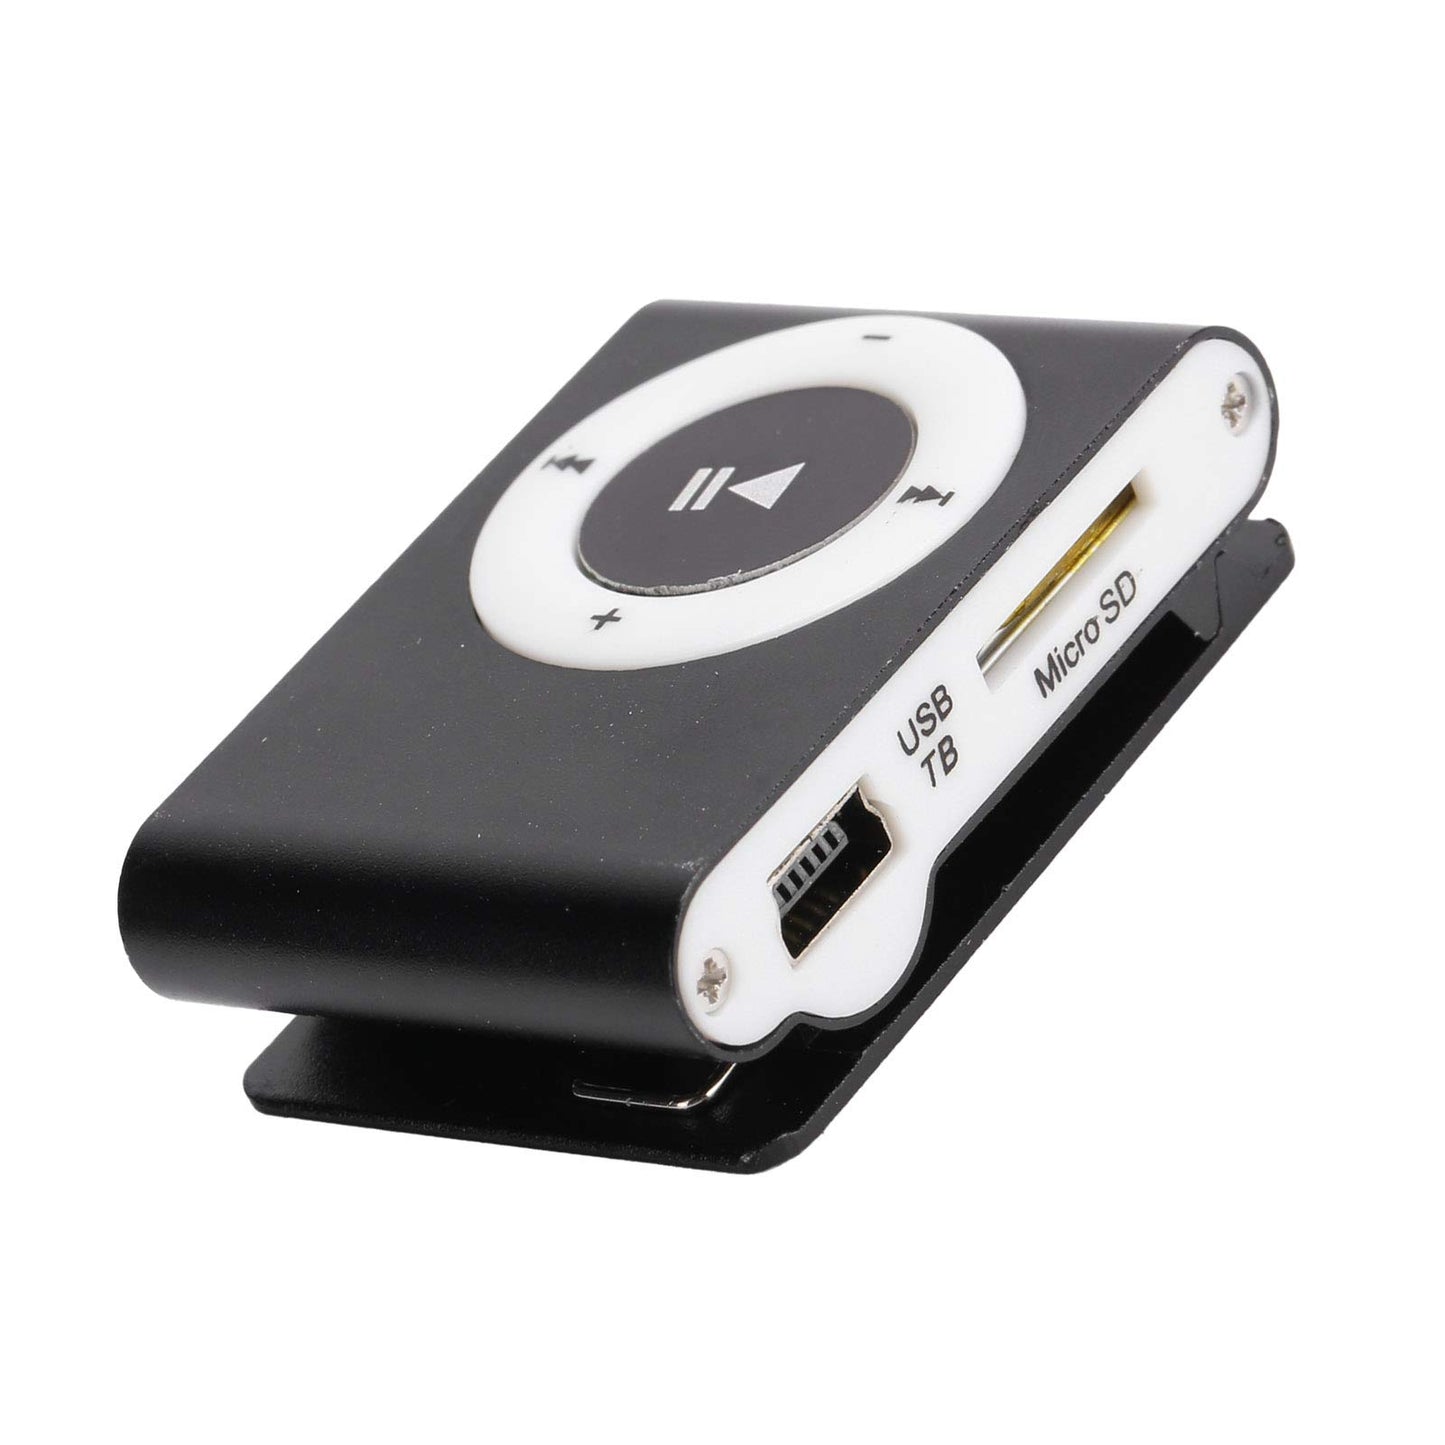 Digital MP3 Player, Portable HiFi Lossless Sound Music Player Mini Music Media Player Voice Recorder with Earphone USB Cable, Maximum Support 8GB Expansion for Outdoor Sports Running(Black)